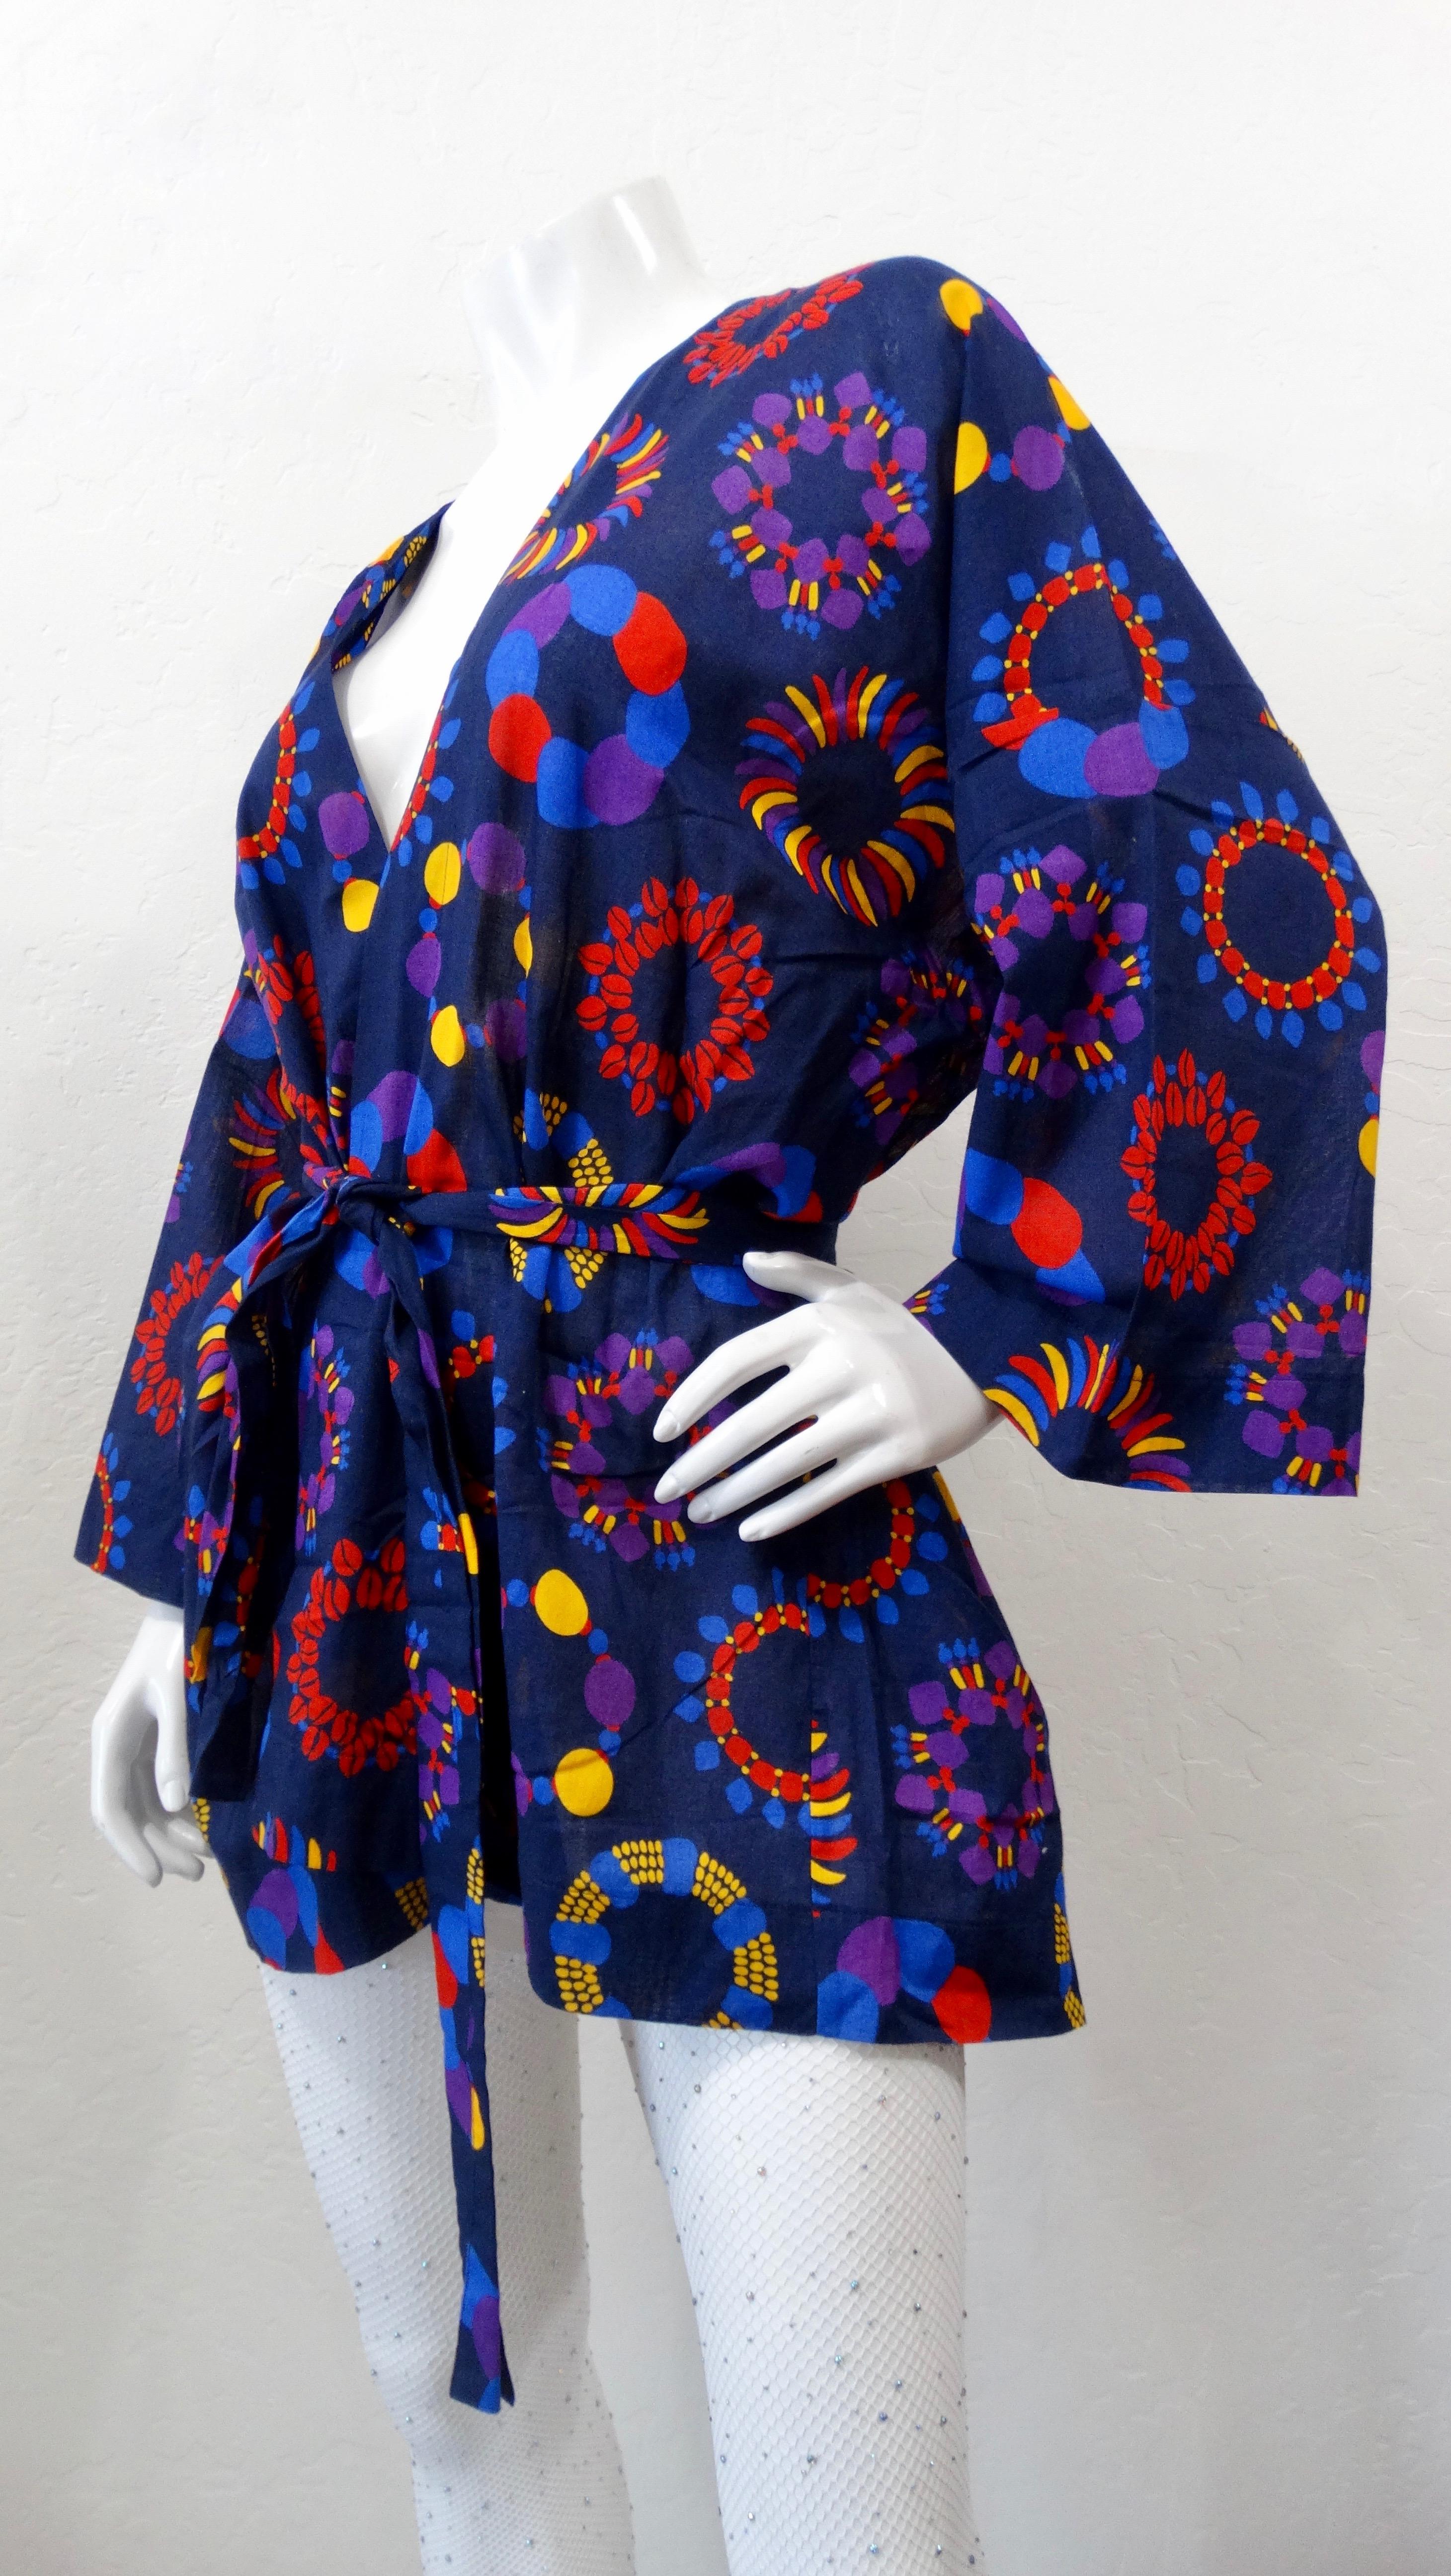 Introduce your wardrobe to this amazing Yves Saint Laurent jacket! Circa 1990s, this short kimono style jacket is a gorgeous cobalt blue and features a contrasting abstract radial pattern. Includes roomy dolman sleeves and a removable waist tie.